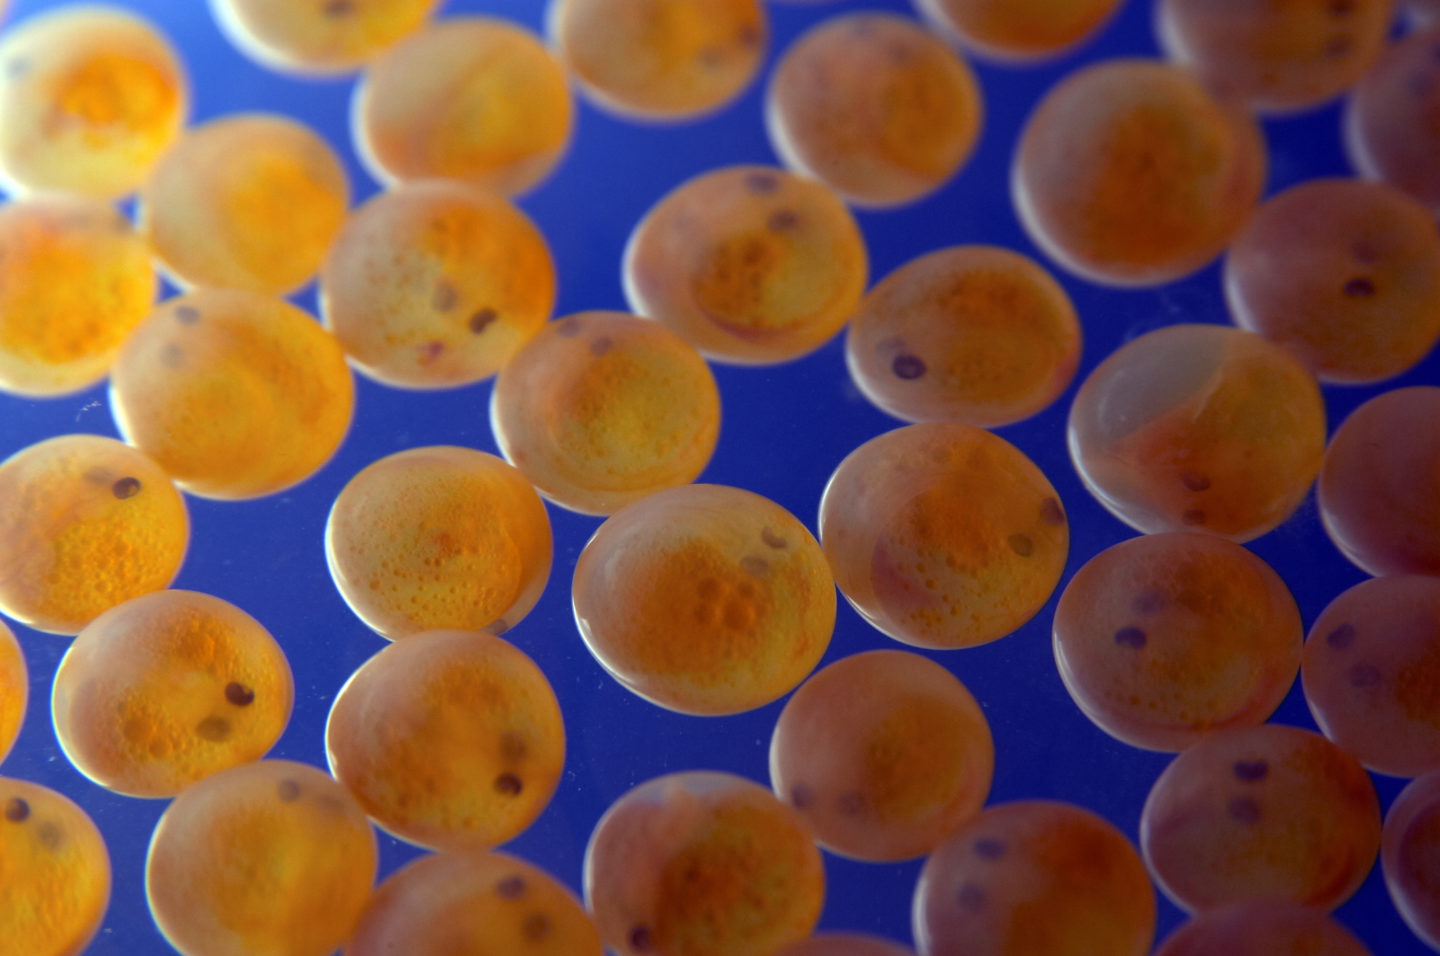 Deadly virus outbreak prompted fears over import of fish farm eggs to Scotland 5